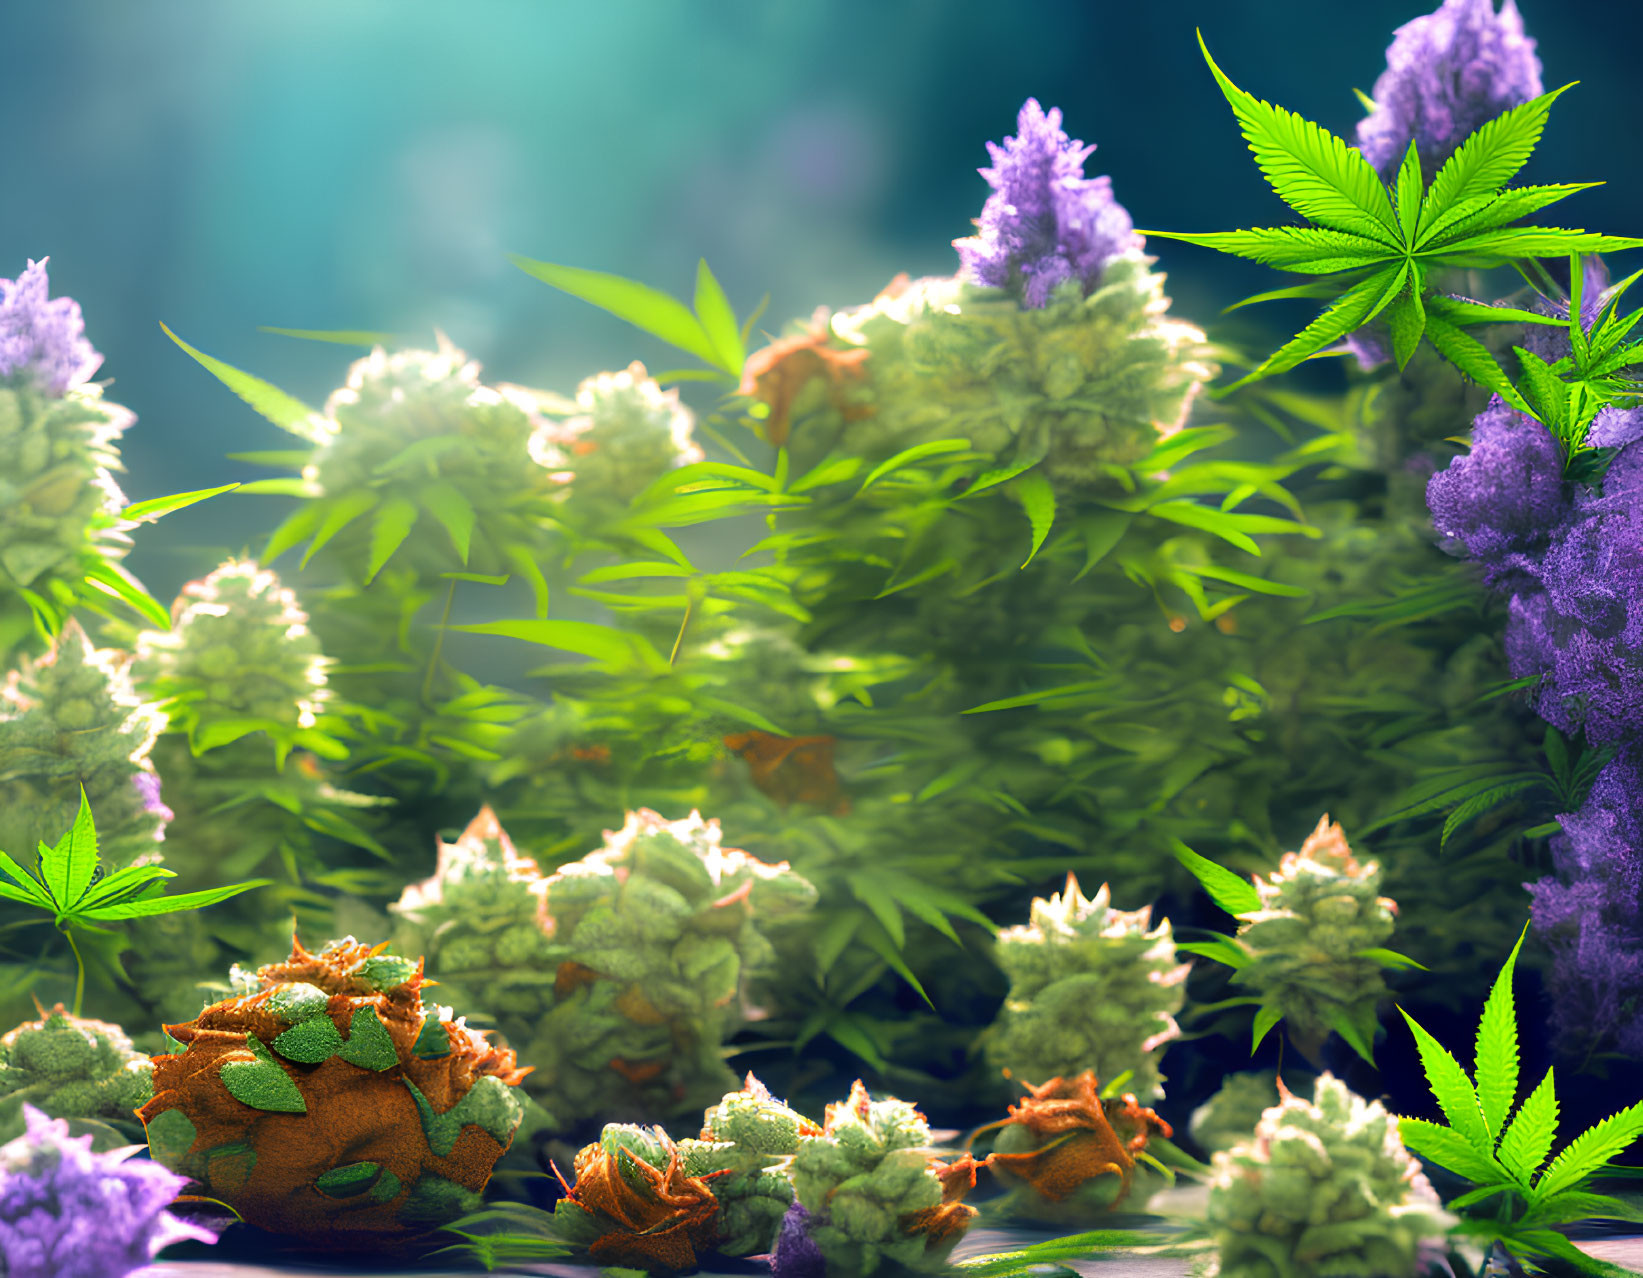 Vivid green cannabis plants with dense green and purple buds under soft sunlight.